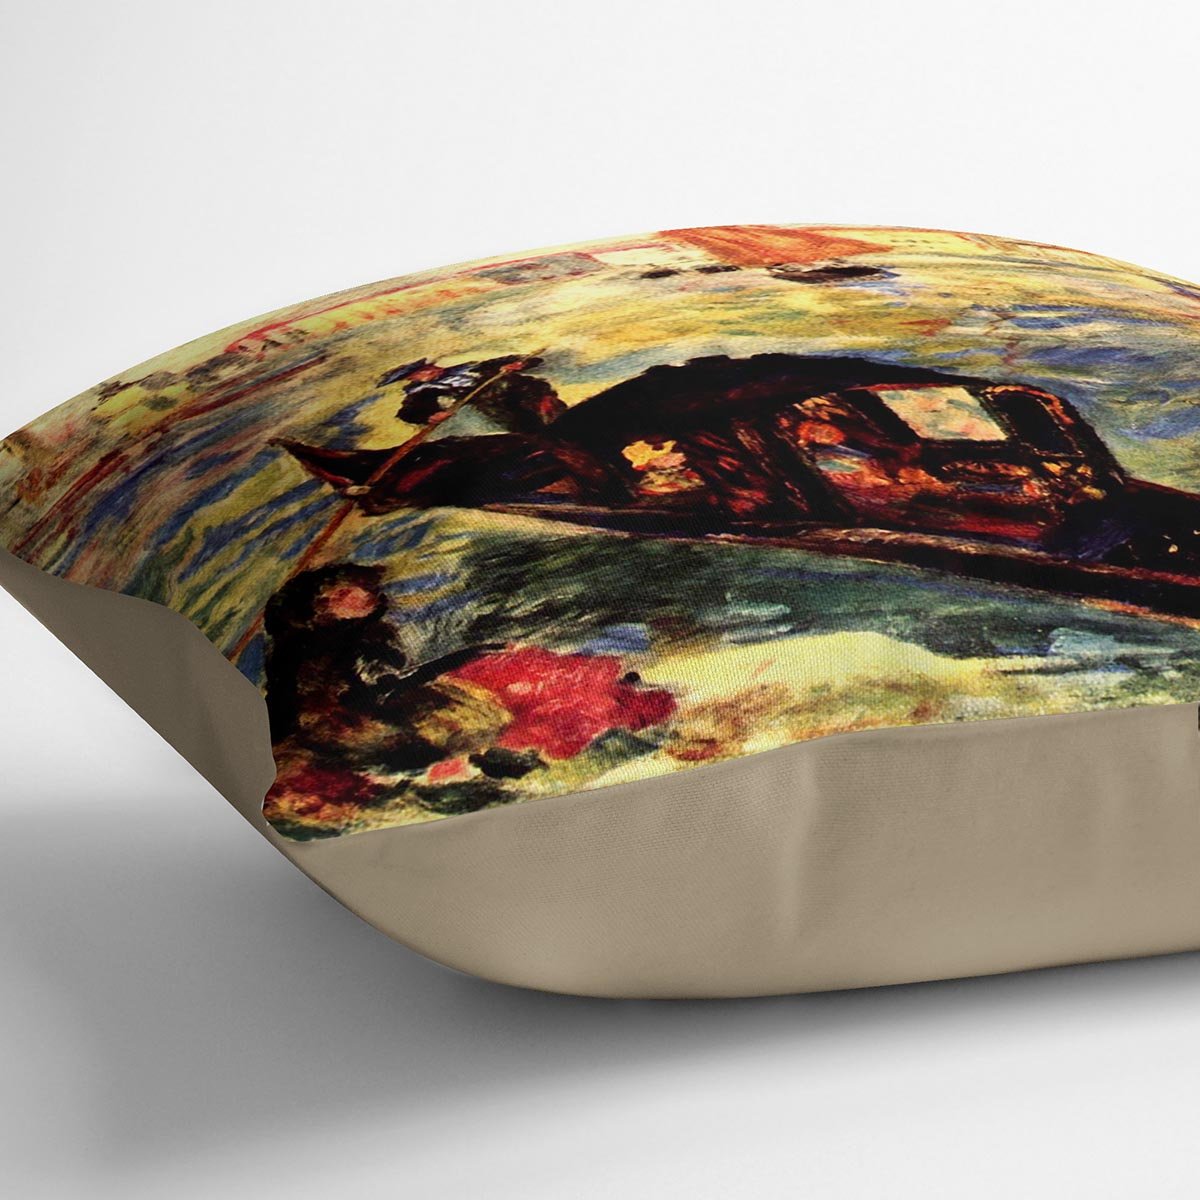 Gondola on the Canale Grande by Renoir Throw Pillow